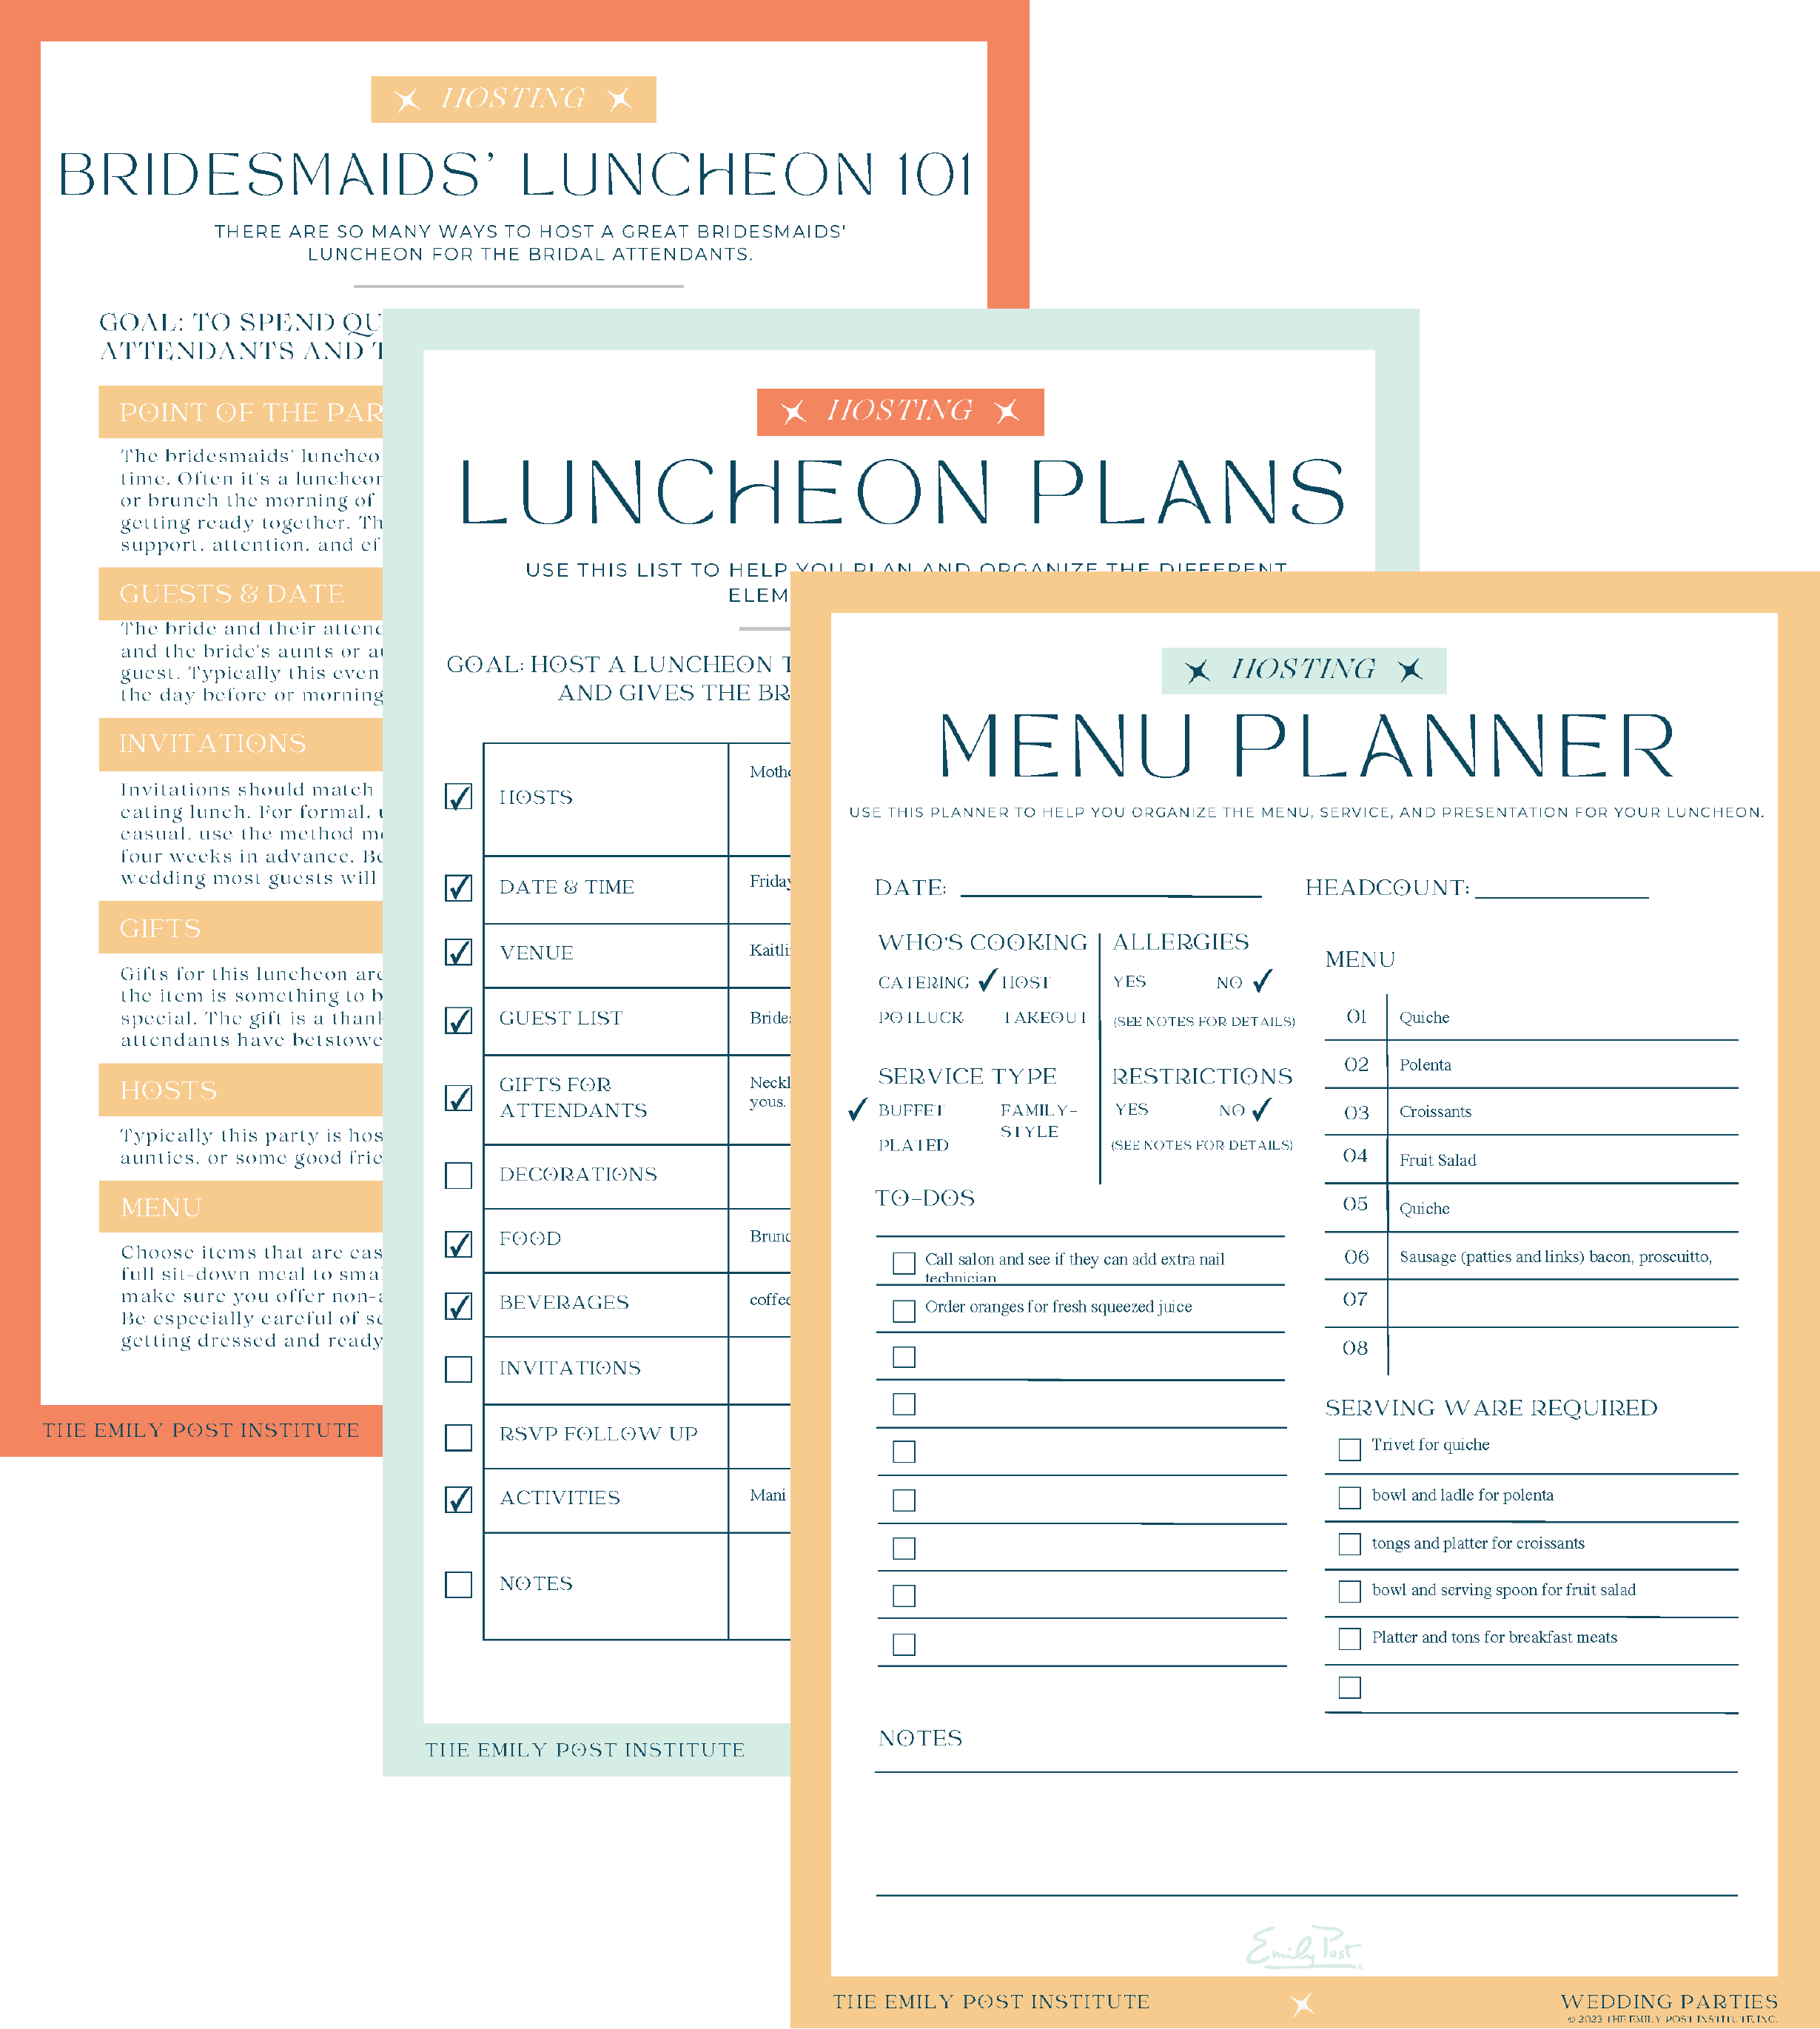 Engagement Party Digital Planner